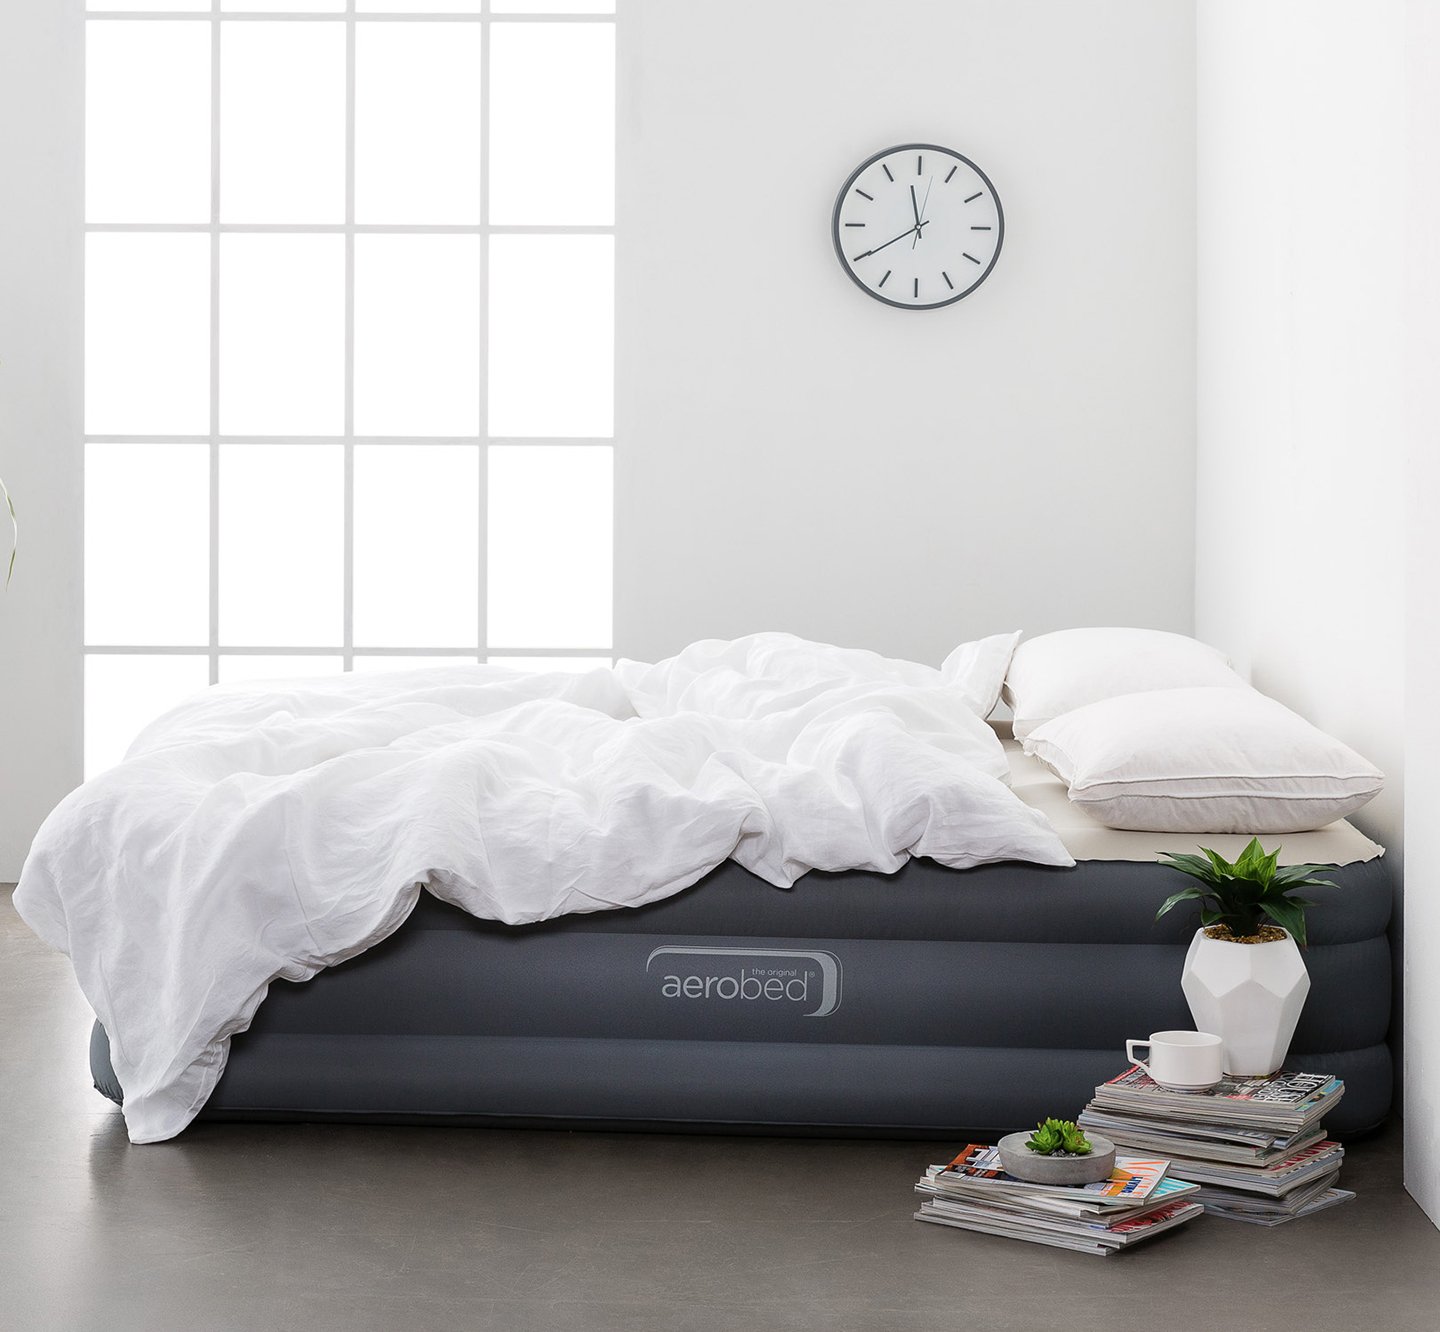 https://s7d9.scene7.com/is/image/NewellRubbermaid/aerobed_od1_home-page_50-50-solid_airbeds_desktop?fmt=jpeg